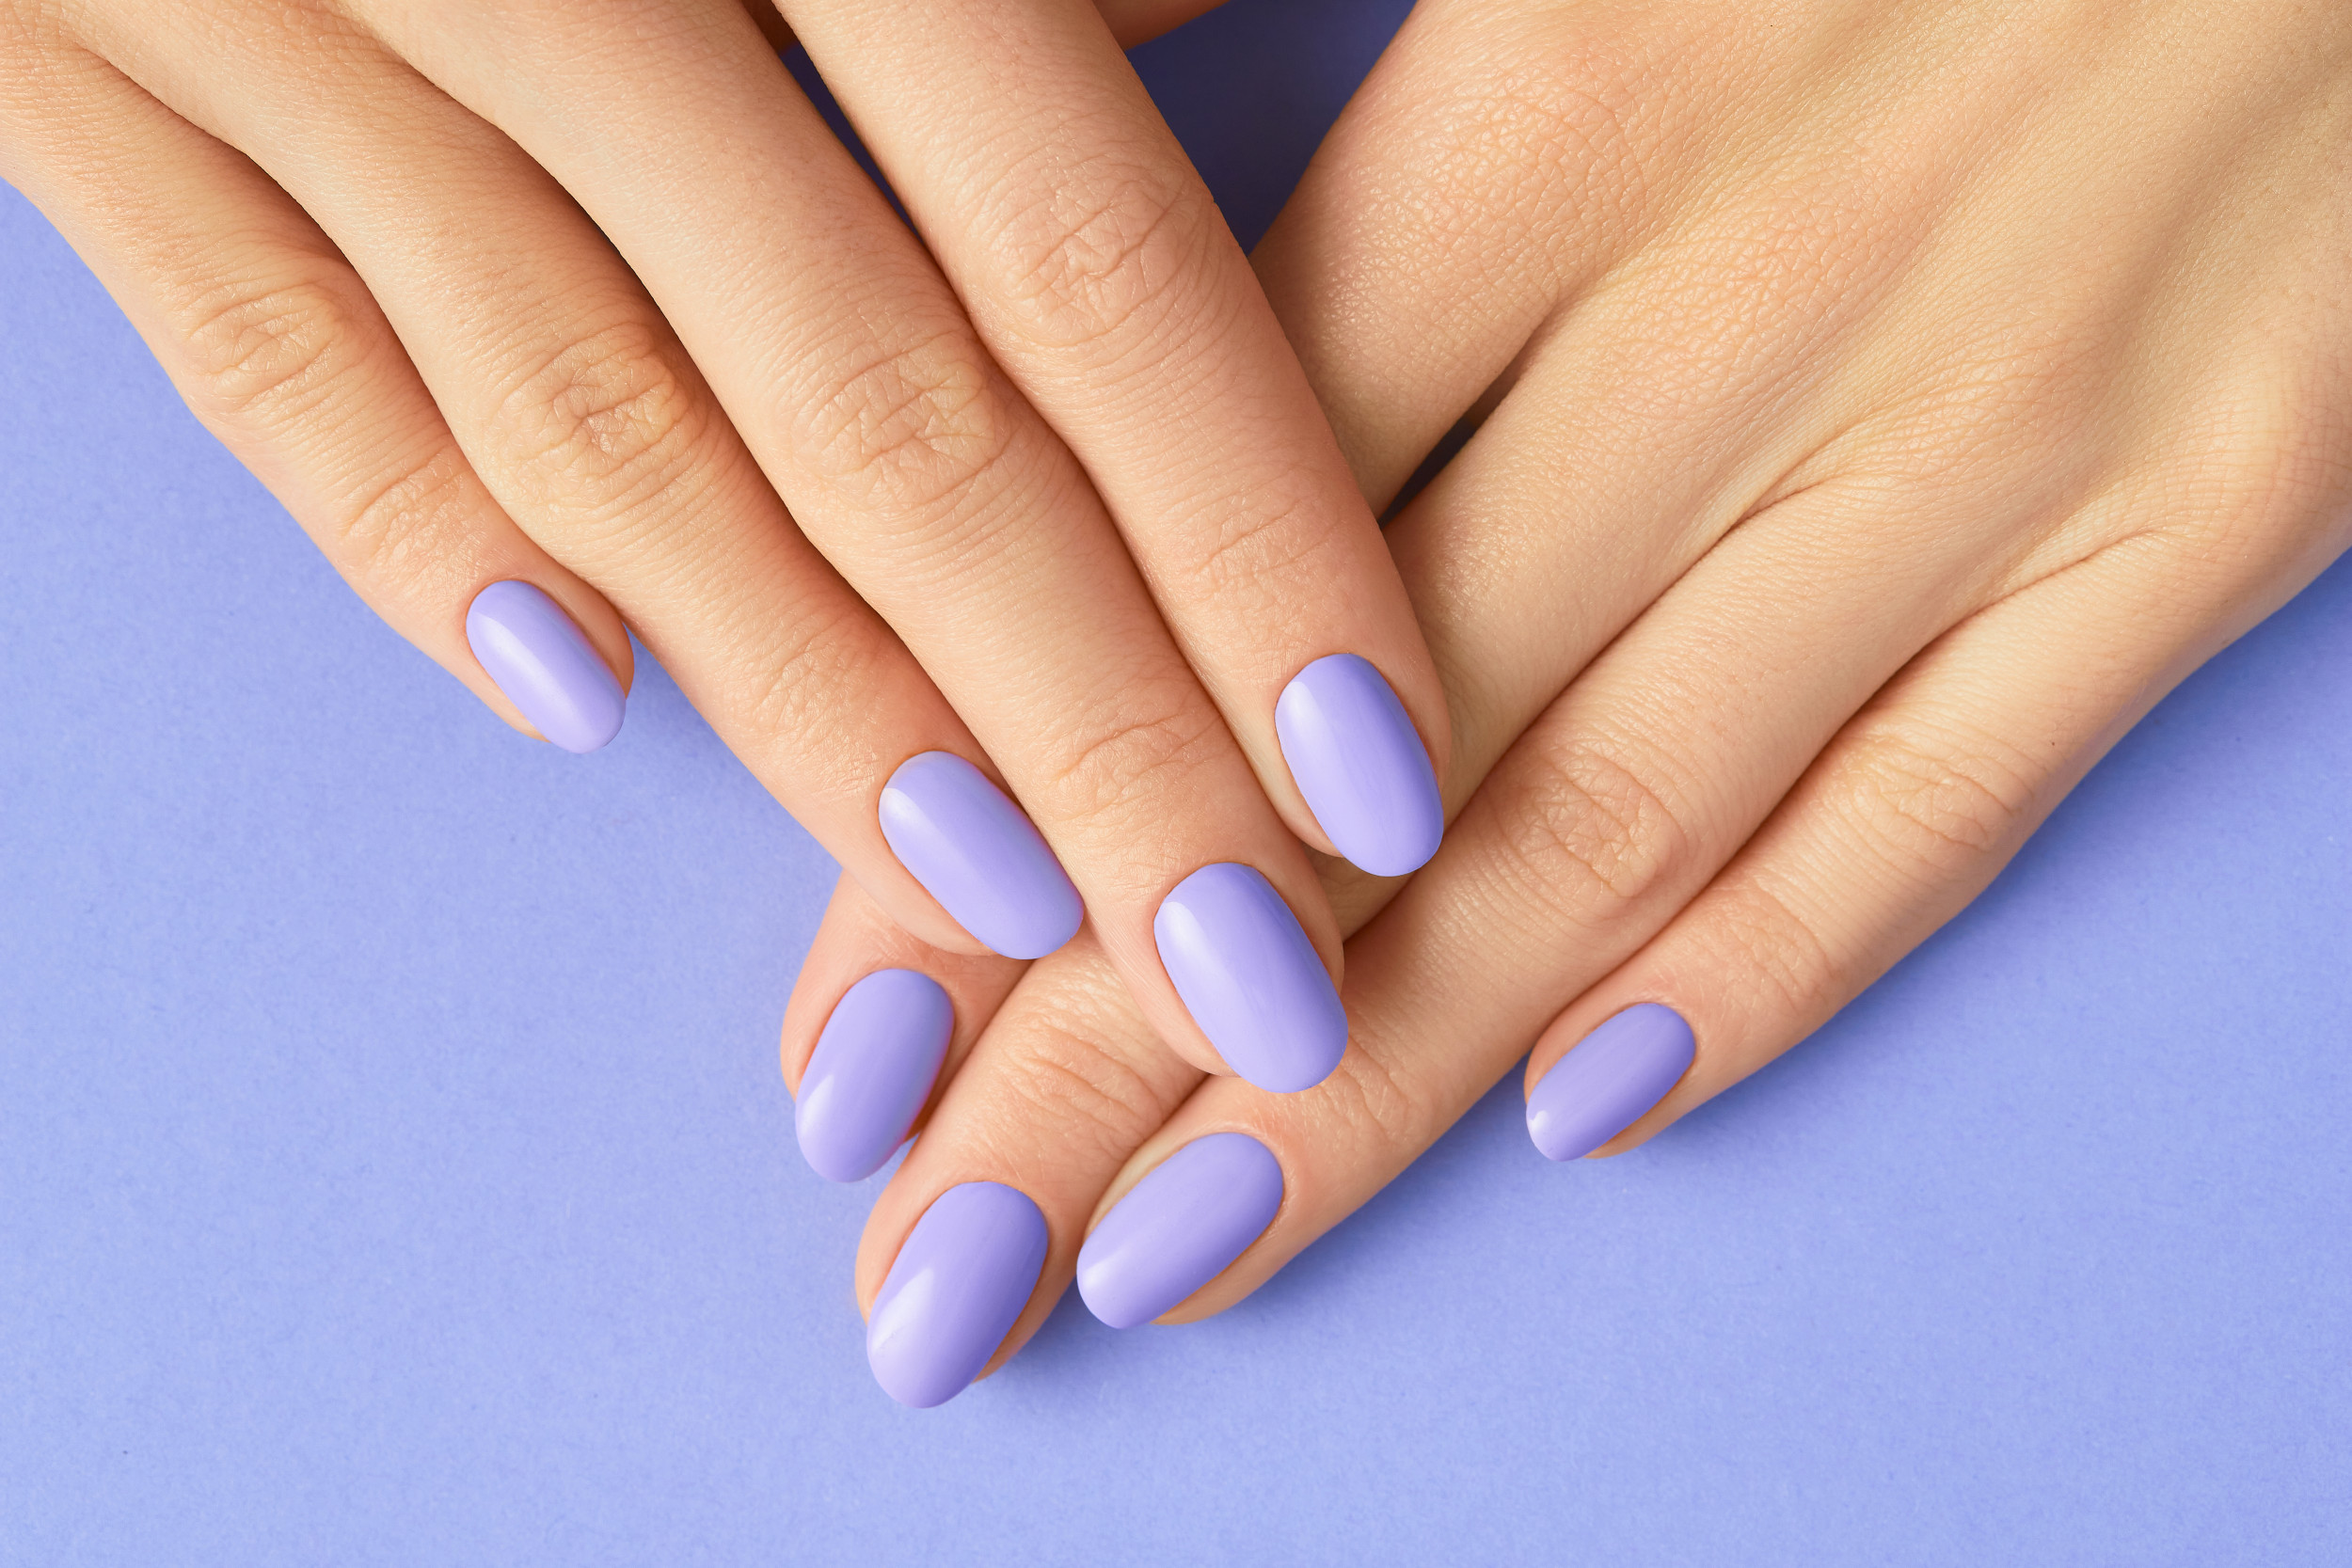 Gel Manicures can Damage Your Nails